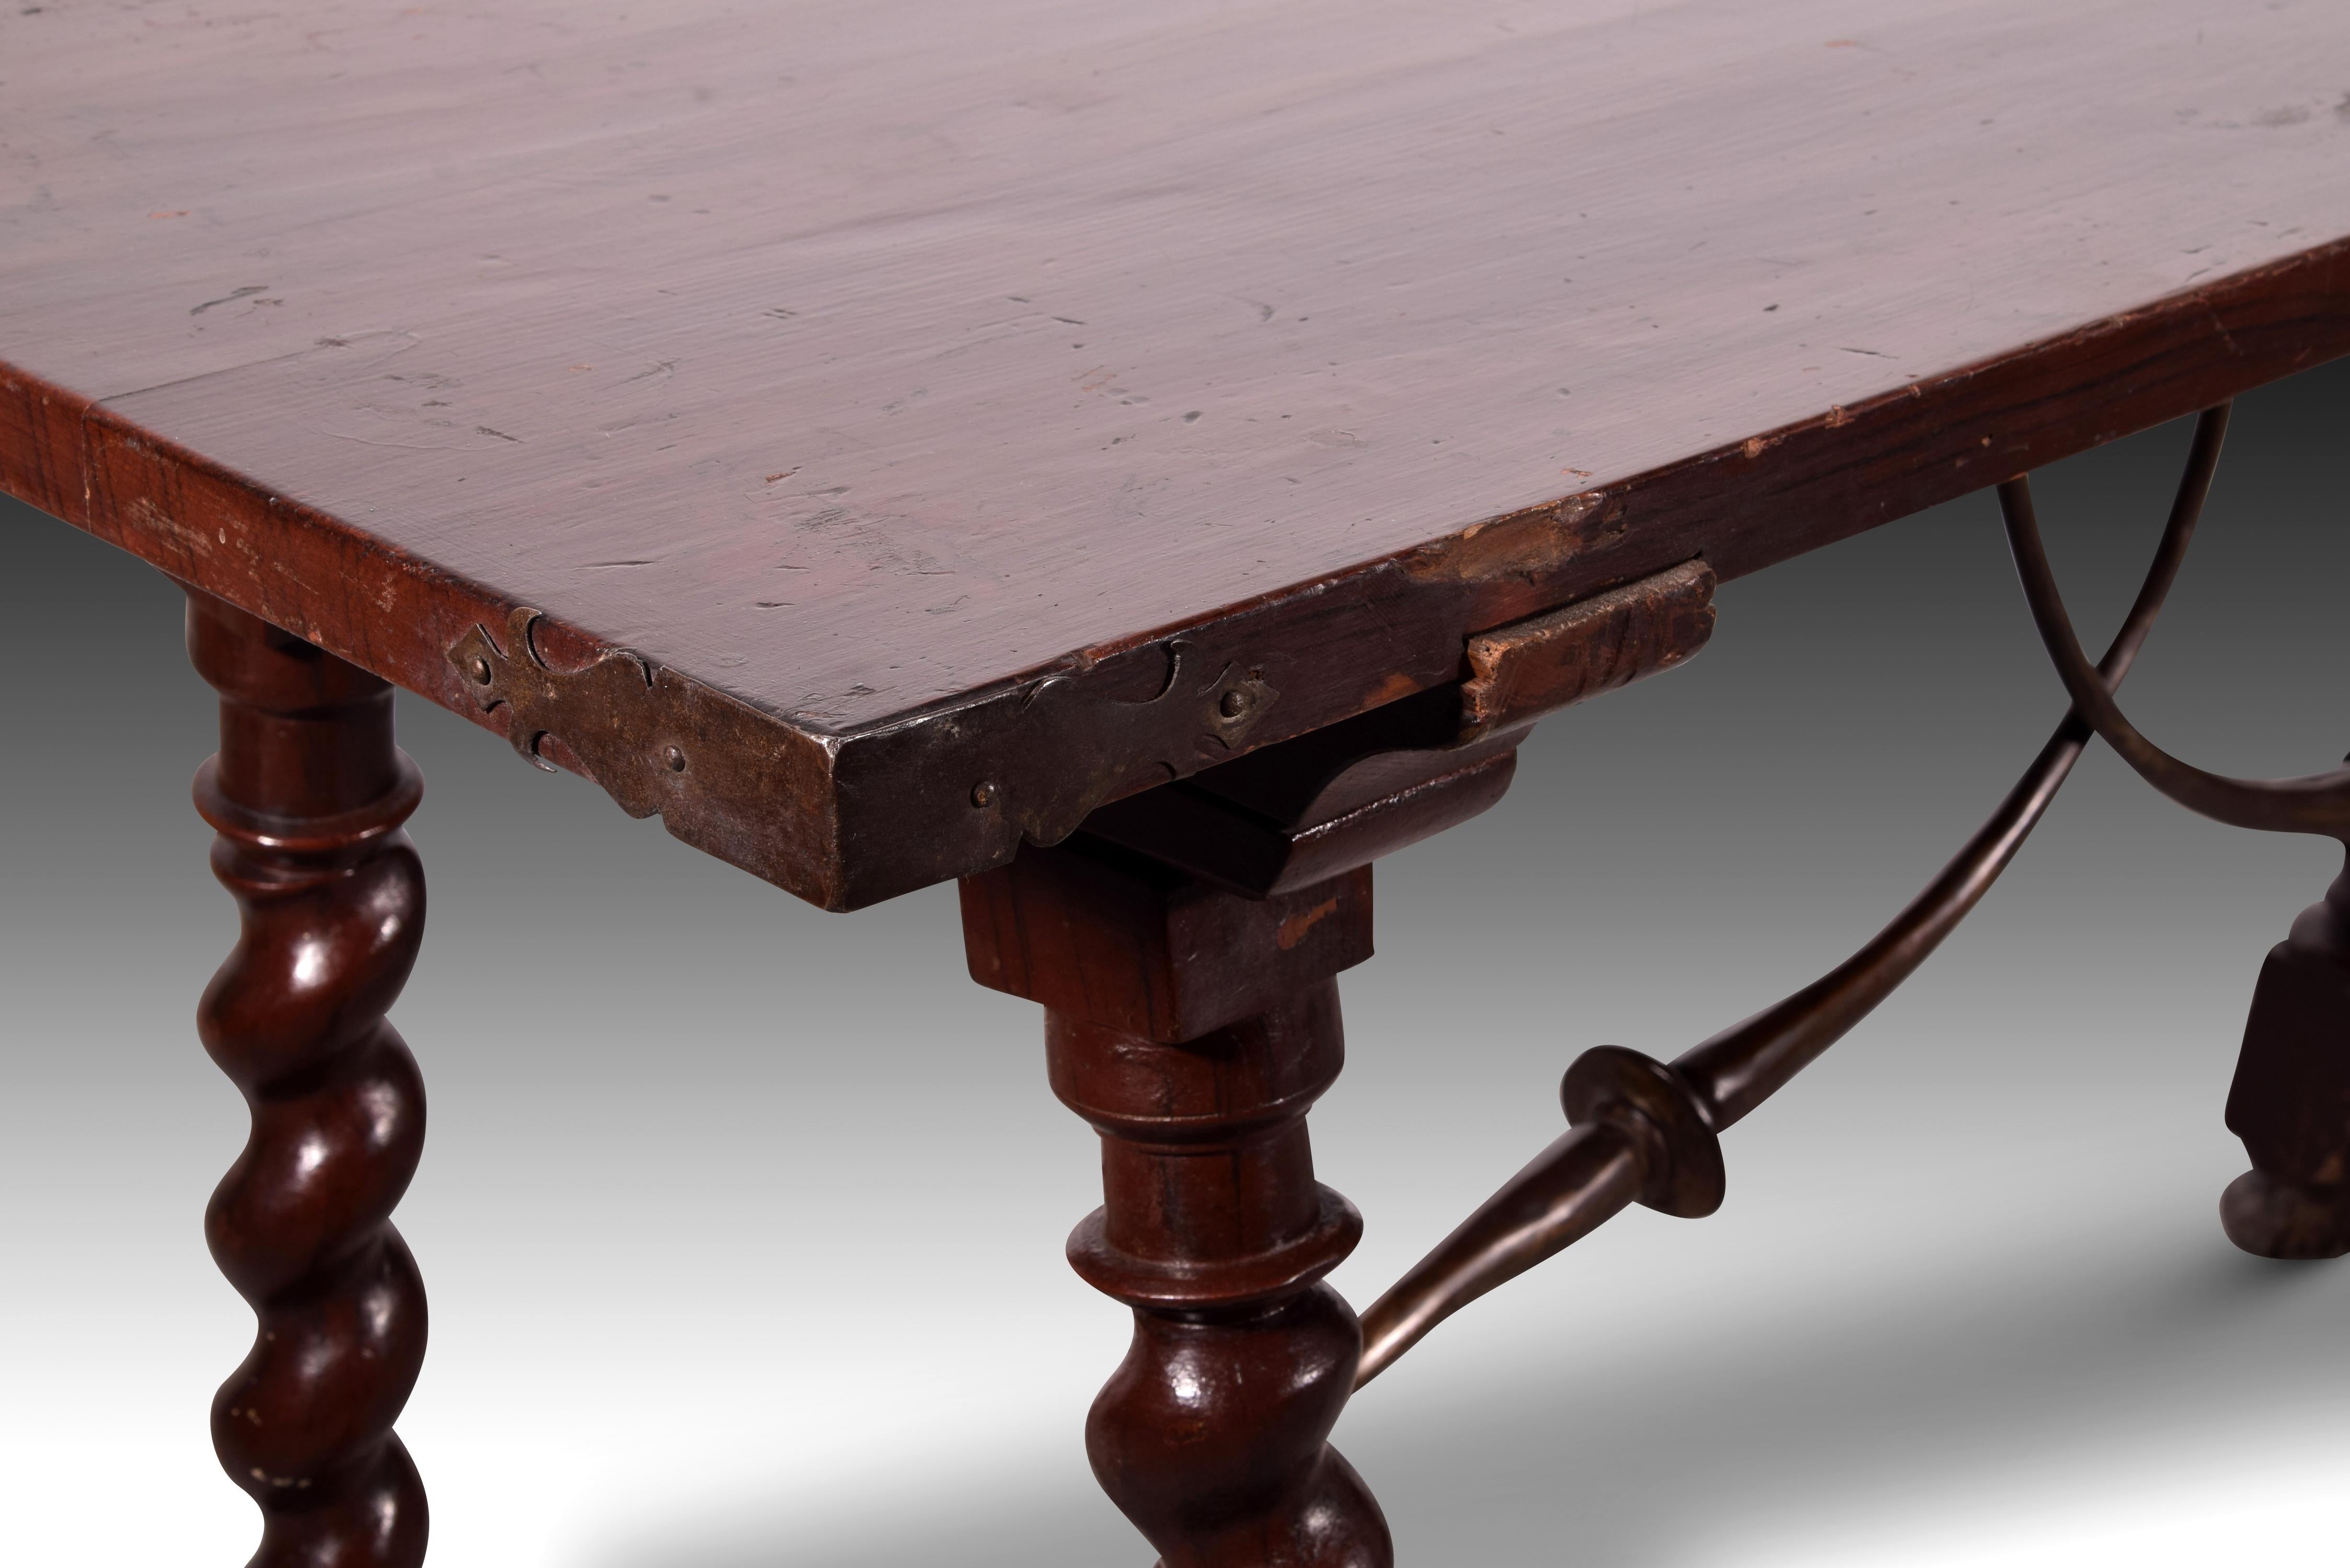 Bargueñera table with spiral leg. Pine and beech wood, iron. Century XVIII. 
Rectangular board table made of pine wood and turned beech wood legs in the shape of spiral columns, which are joined, two by two, by means of a lower chambrane also